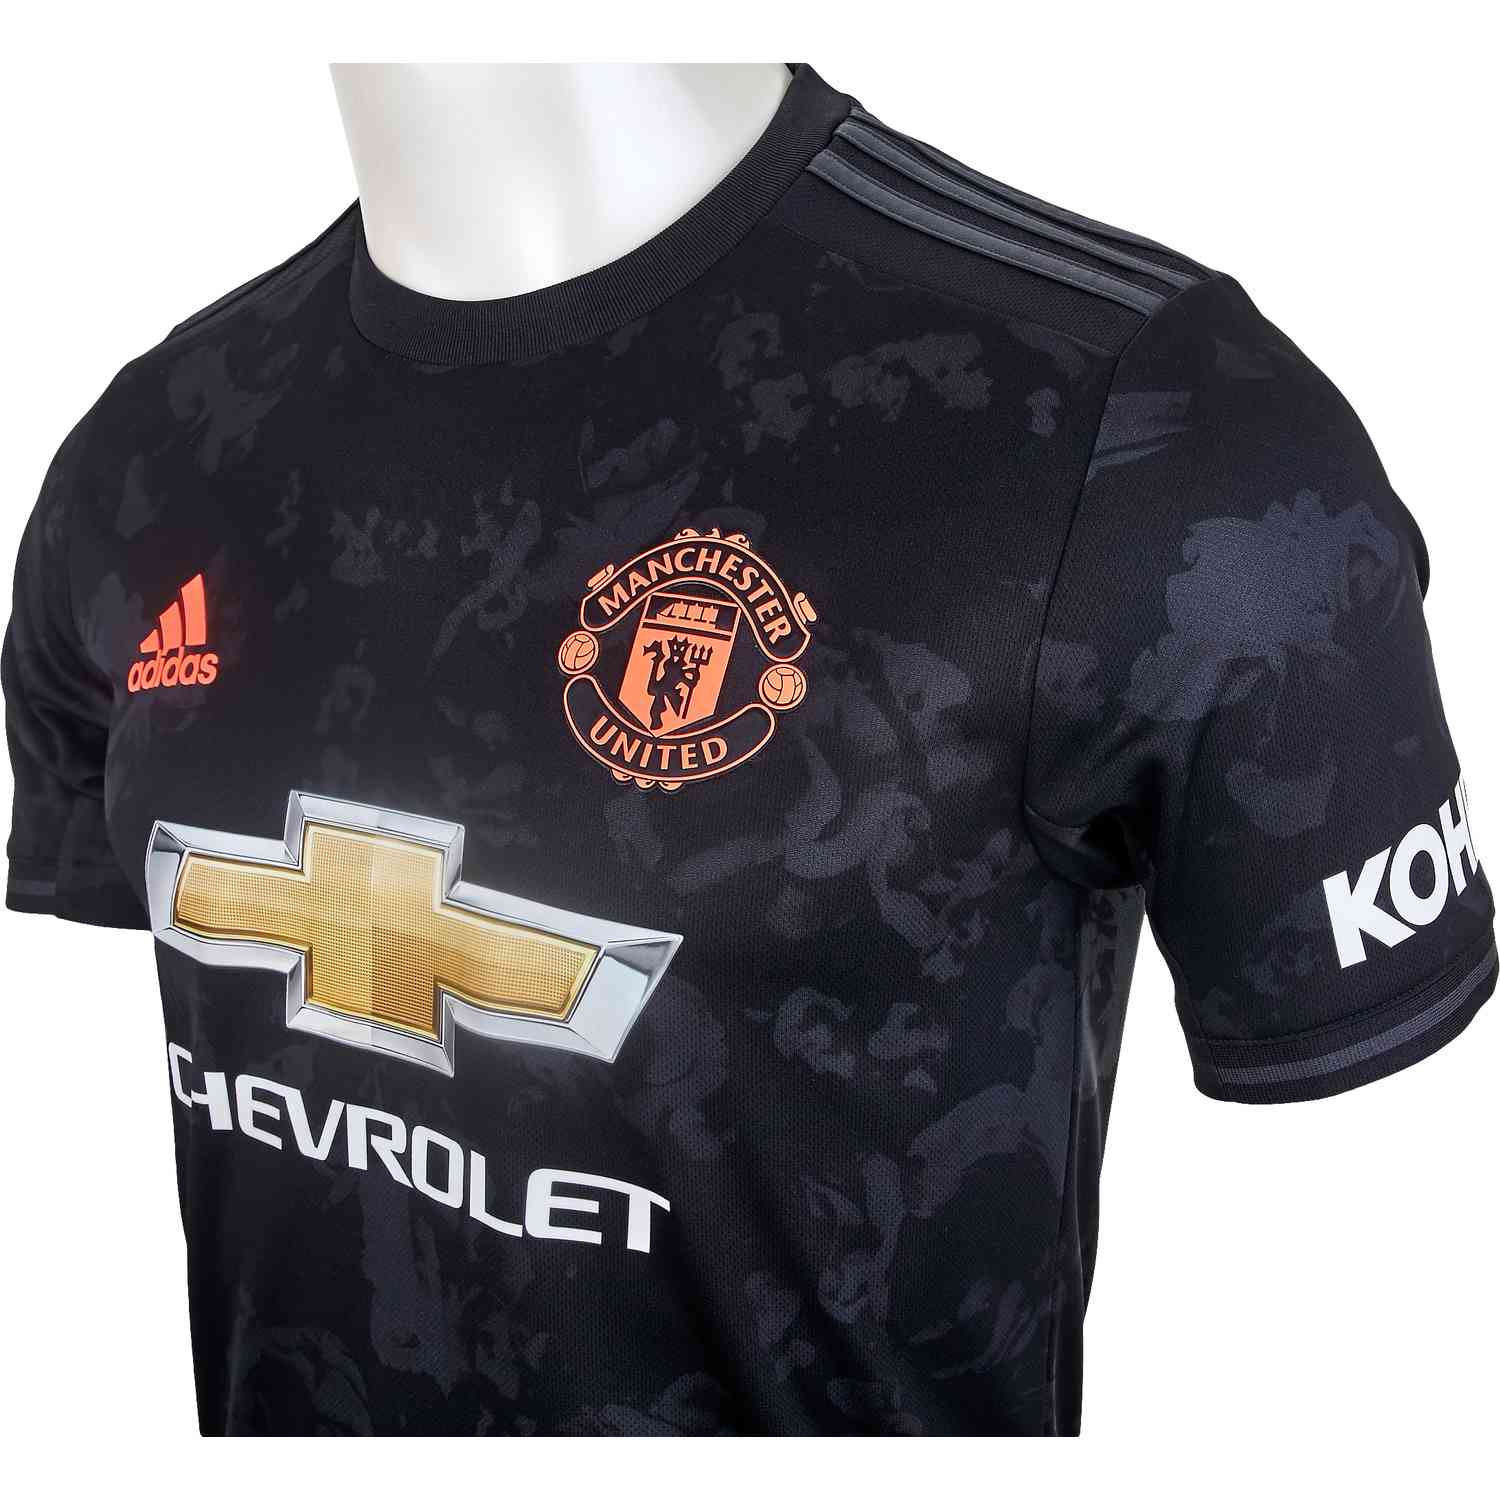 2019/20 adidas Manchester United 3rd Jersey - Soccer Master